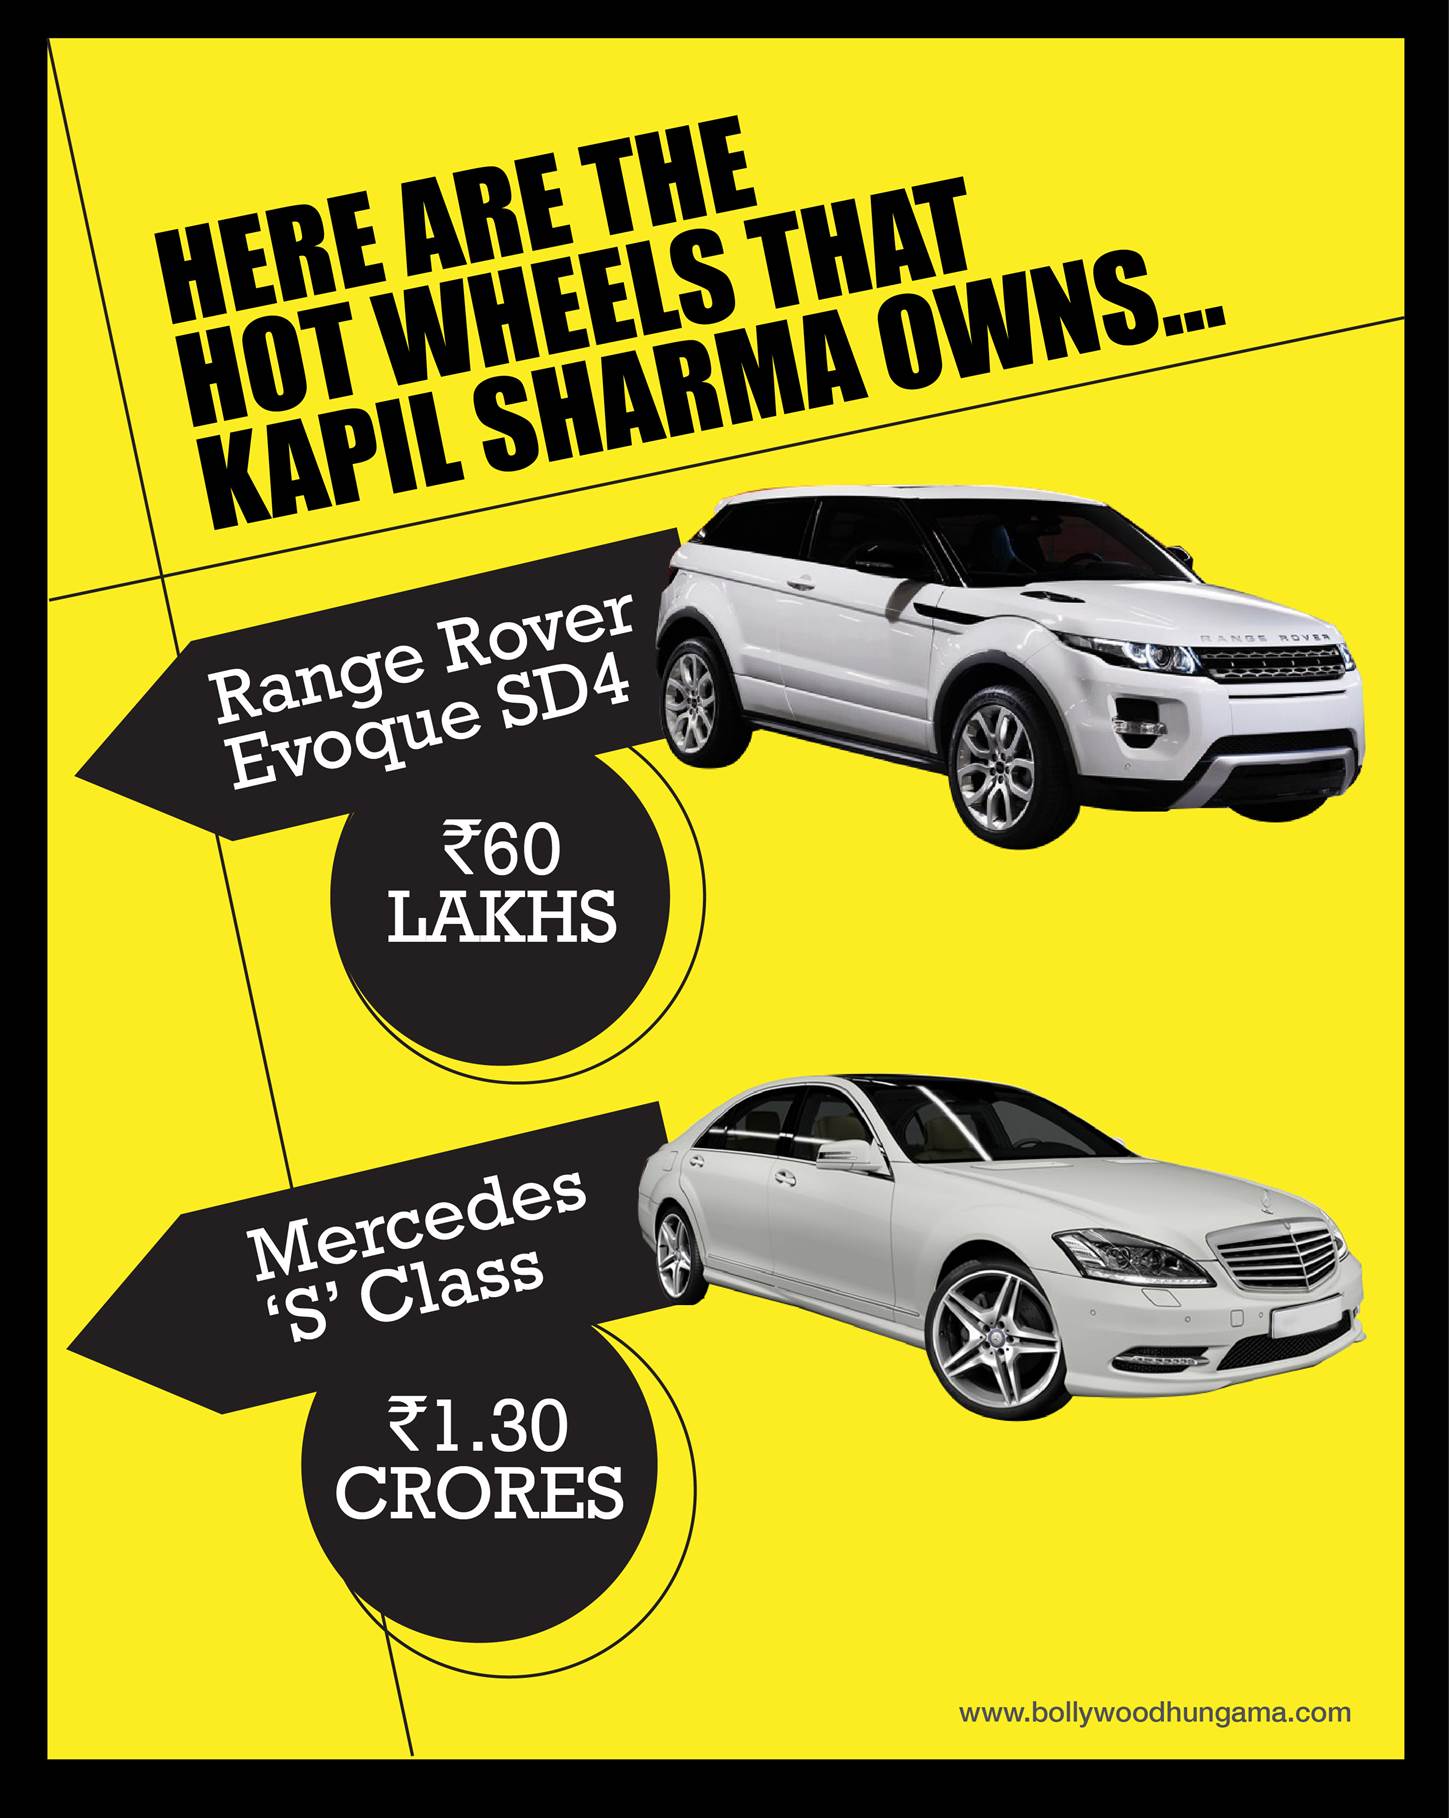 Besides a hot temper, here are the hot wheels that Kapil Sharma owns1